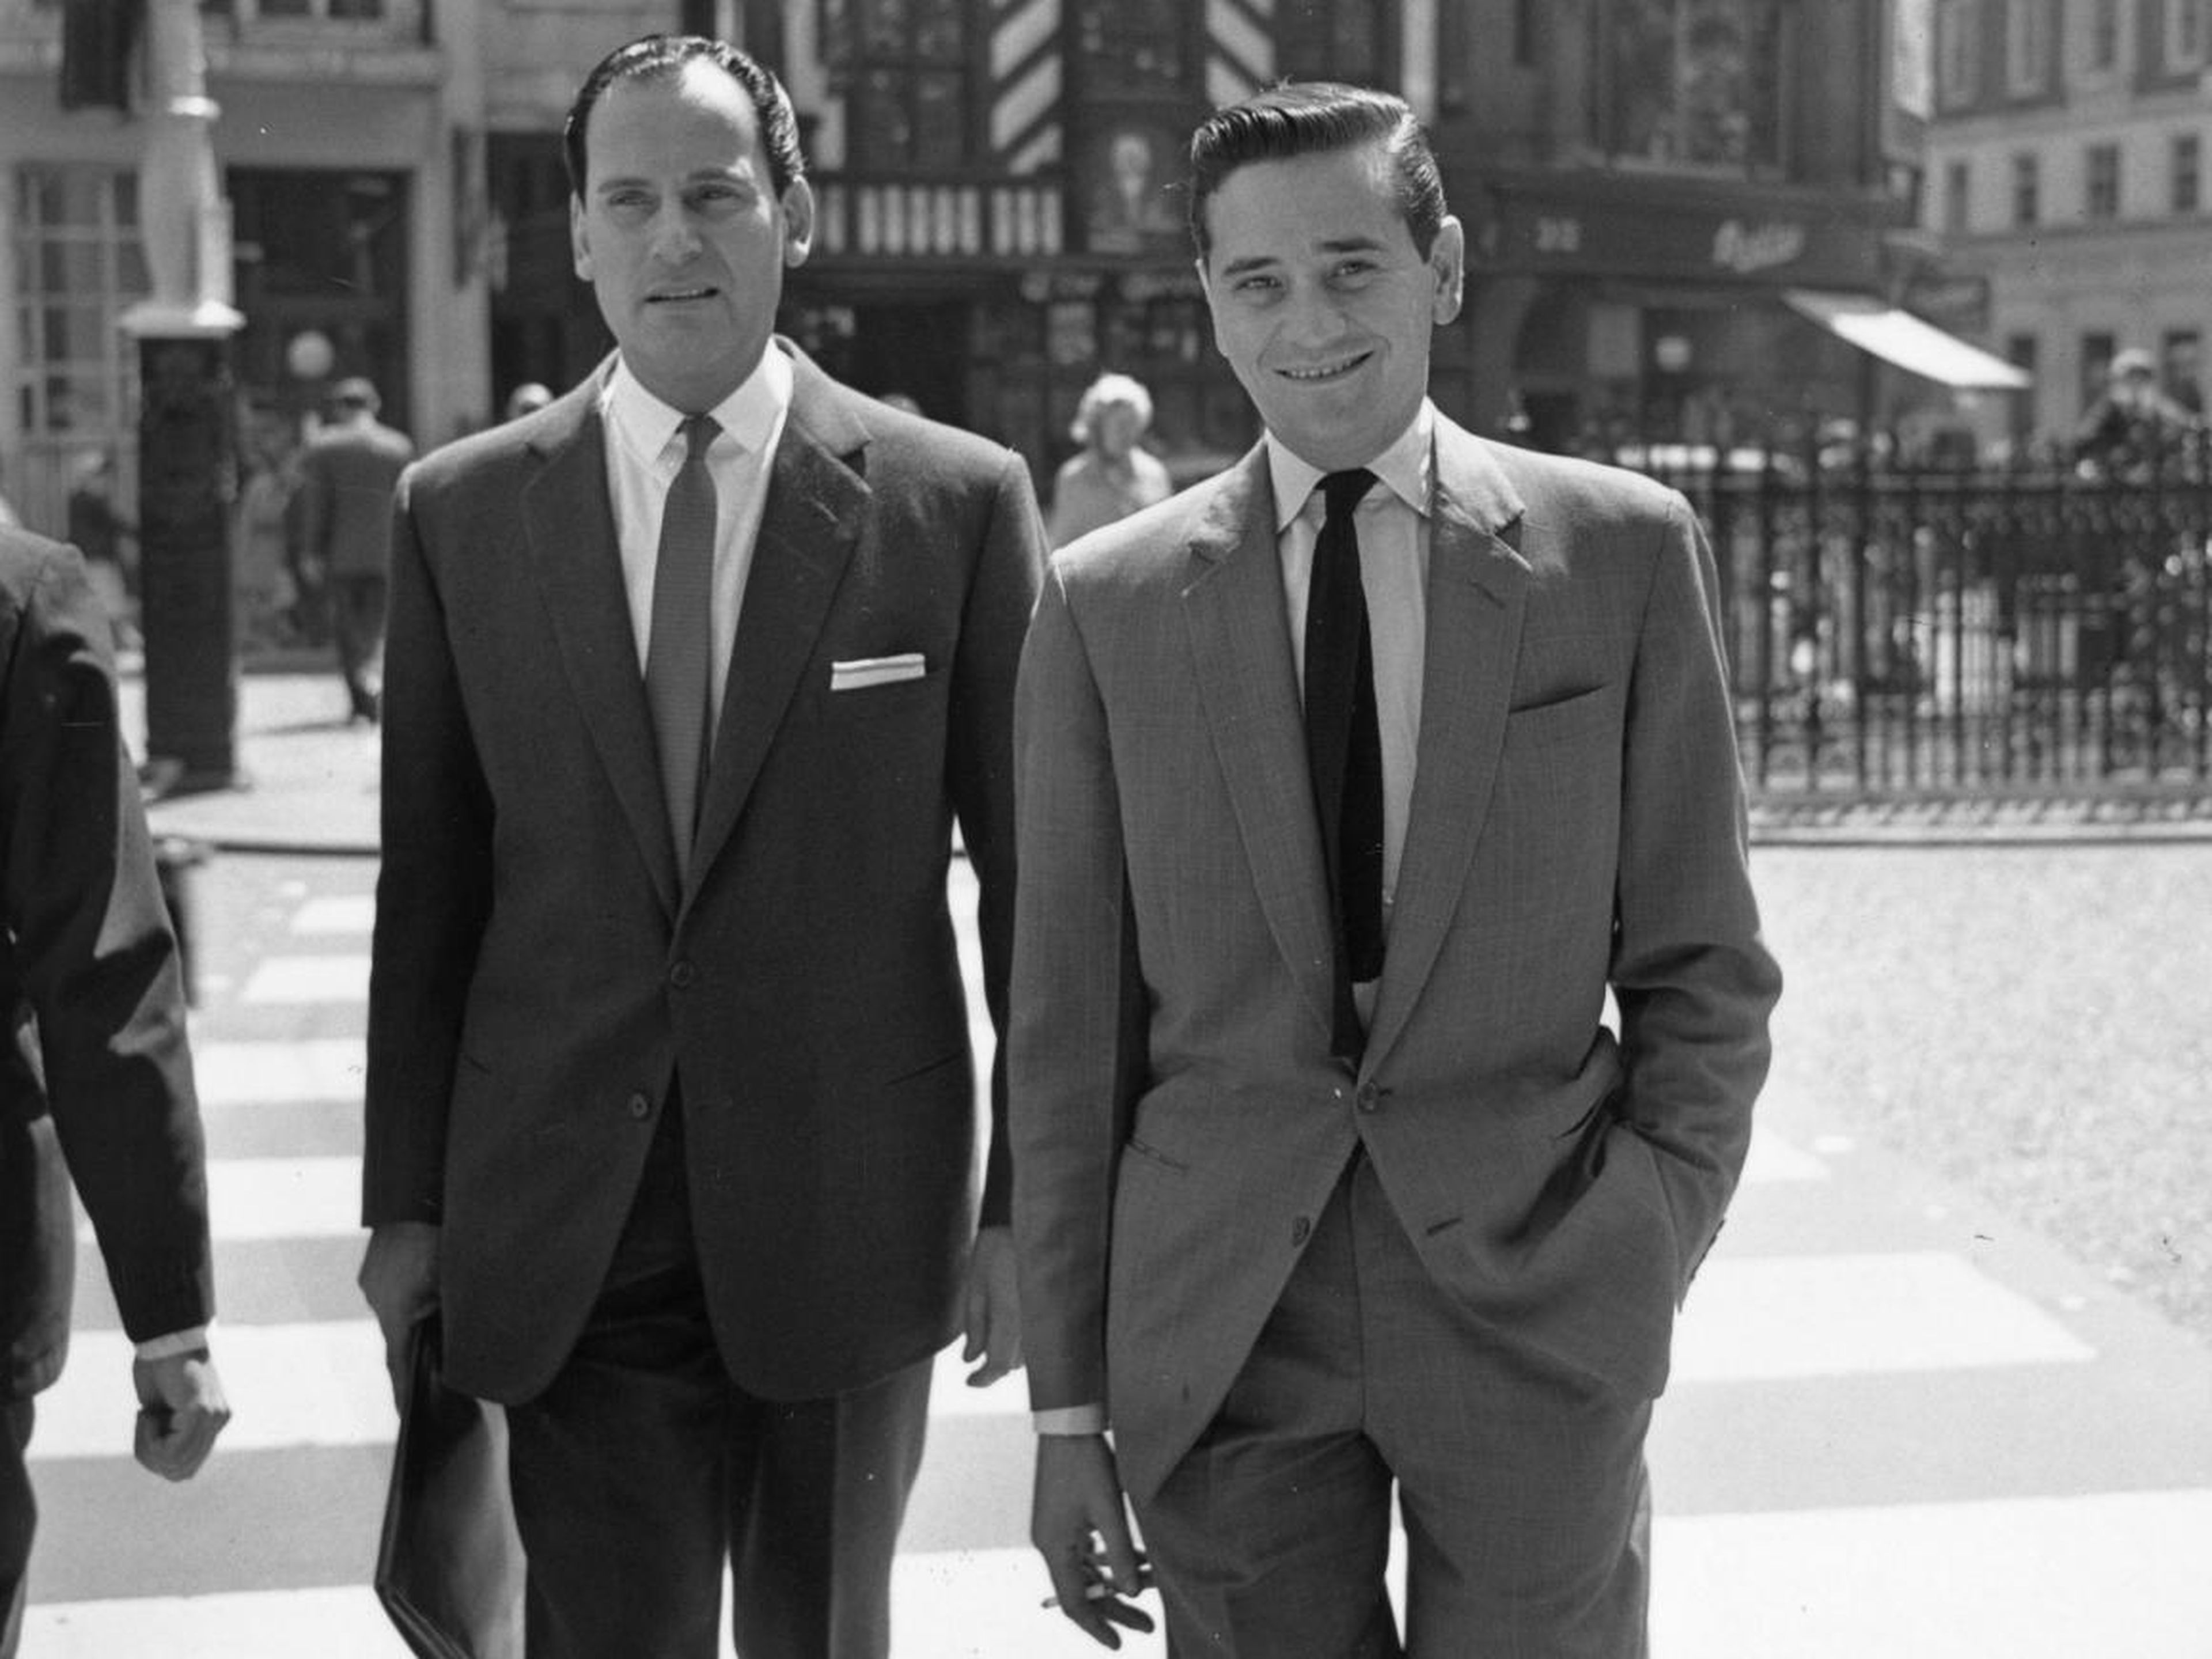 Fashion for men has traditionally been more conservative and less subject to change — especially when it comes to business attire. But suits did continue to slim out throughout the decade.